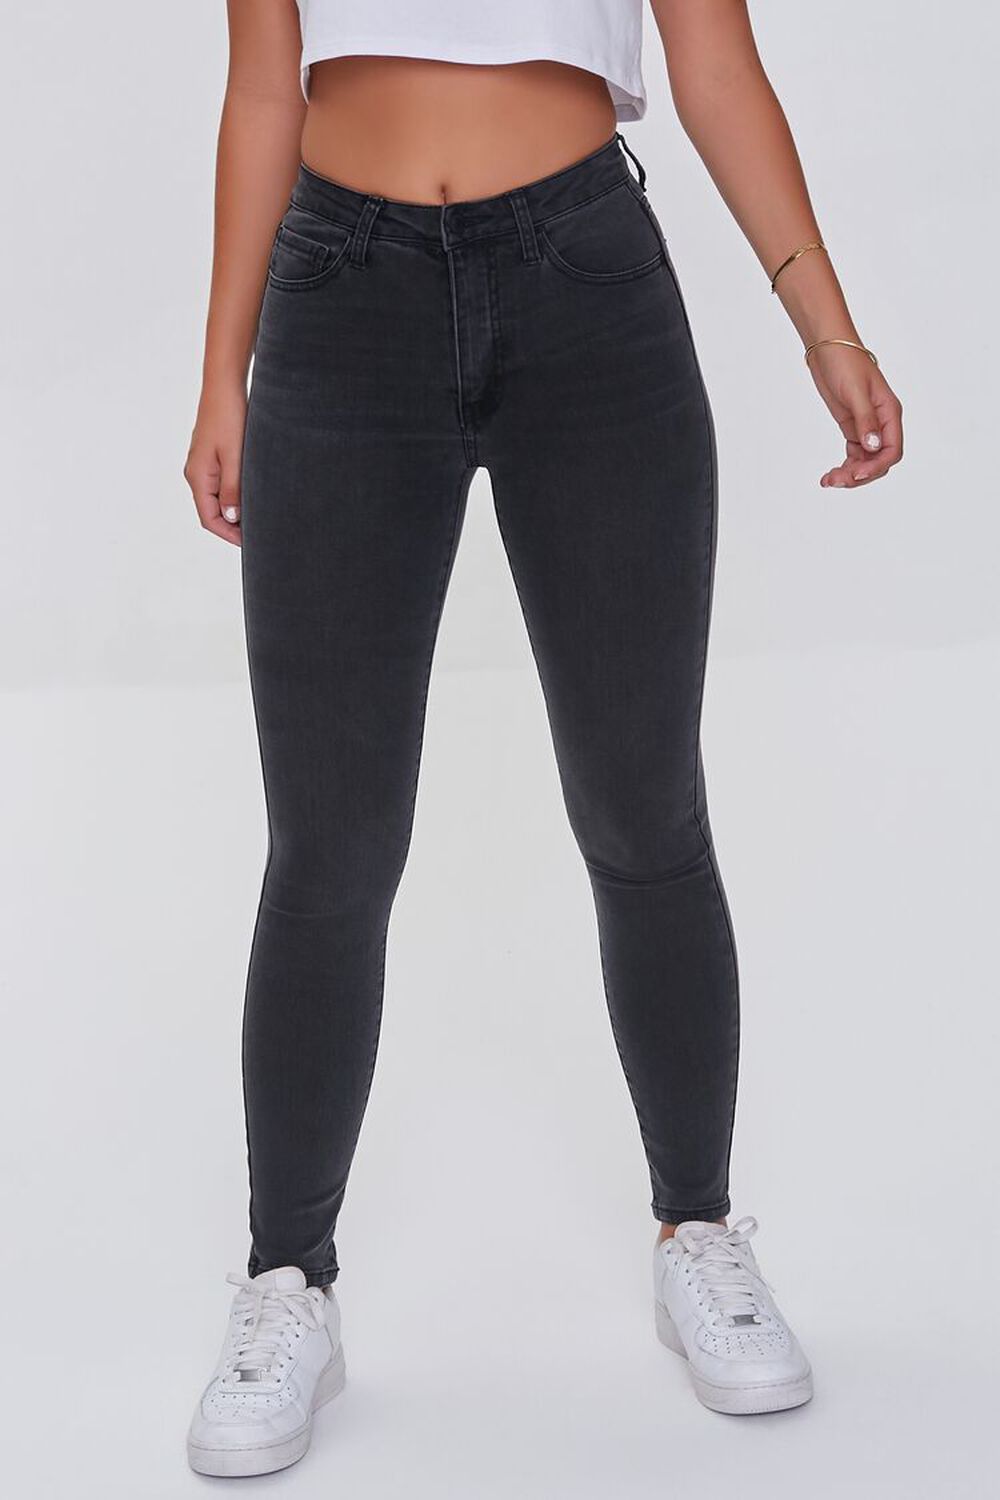 WASHED BLACK Mid-Rise Skinny Jeans, image 2